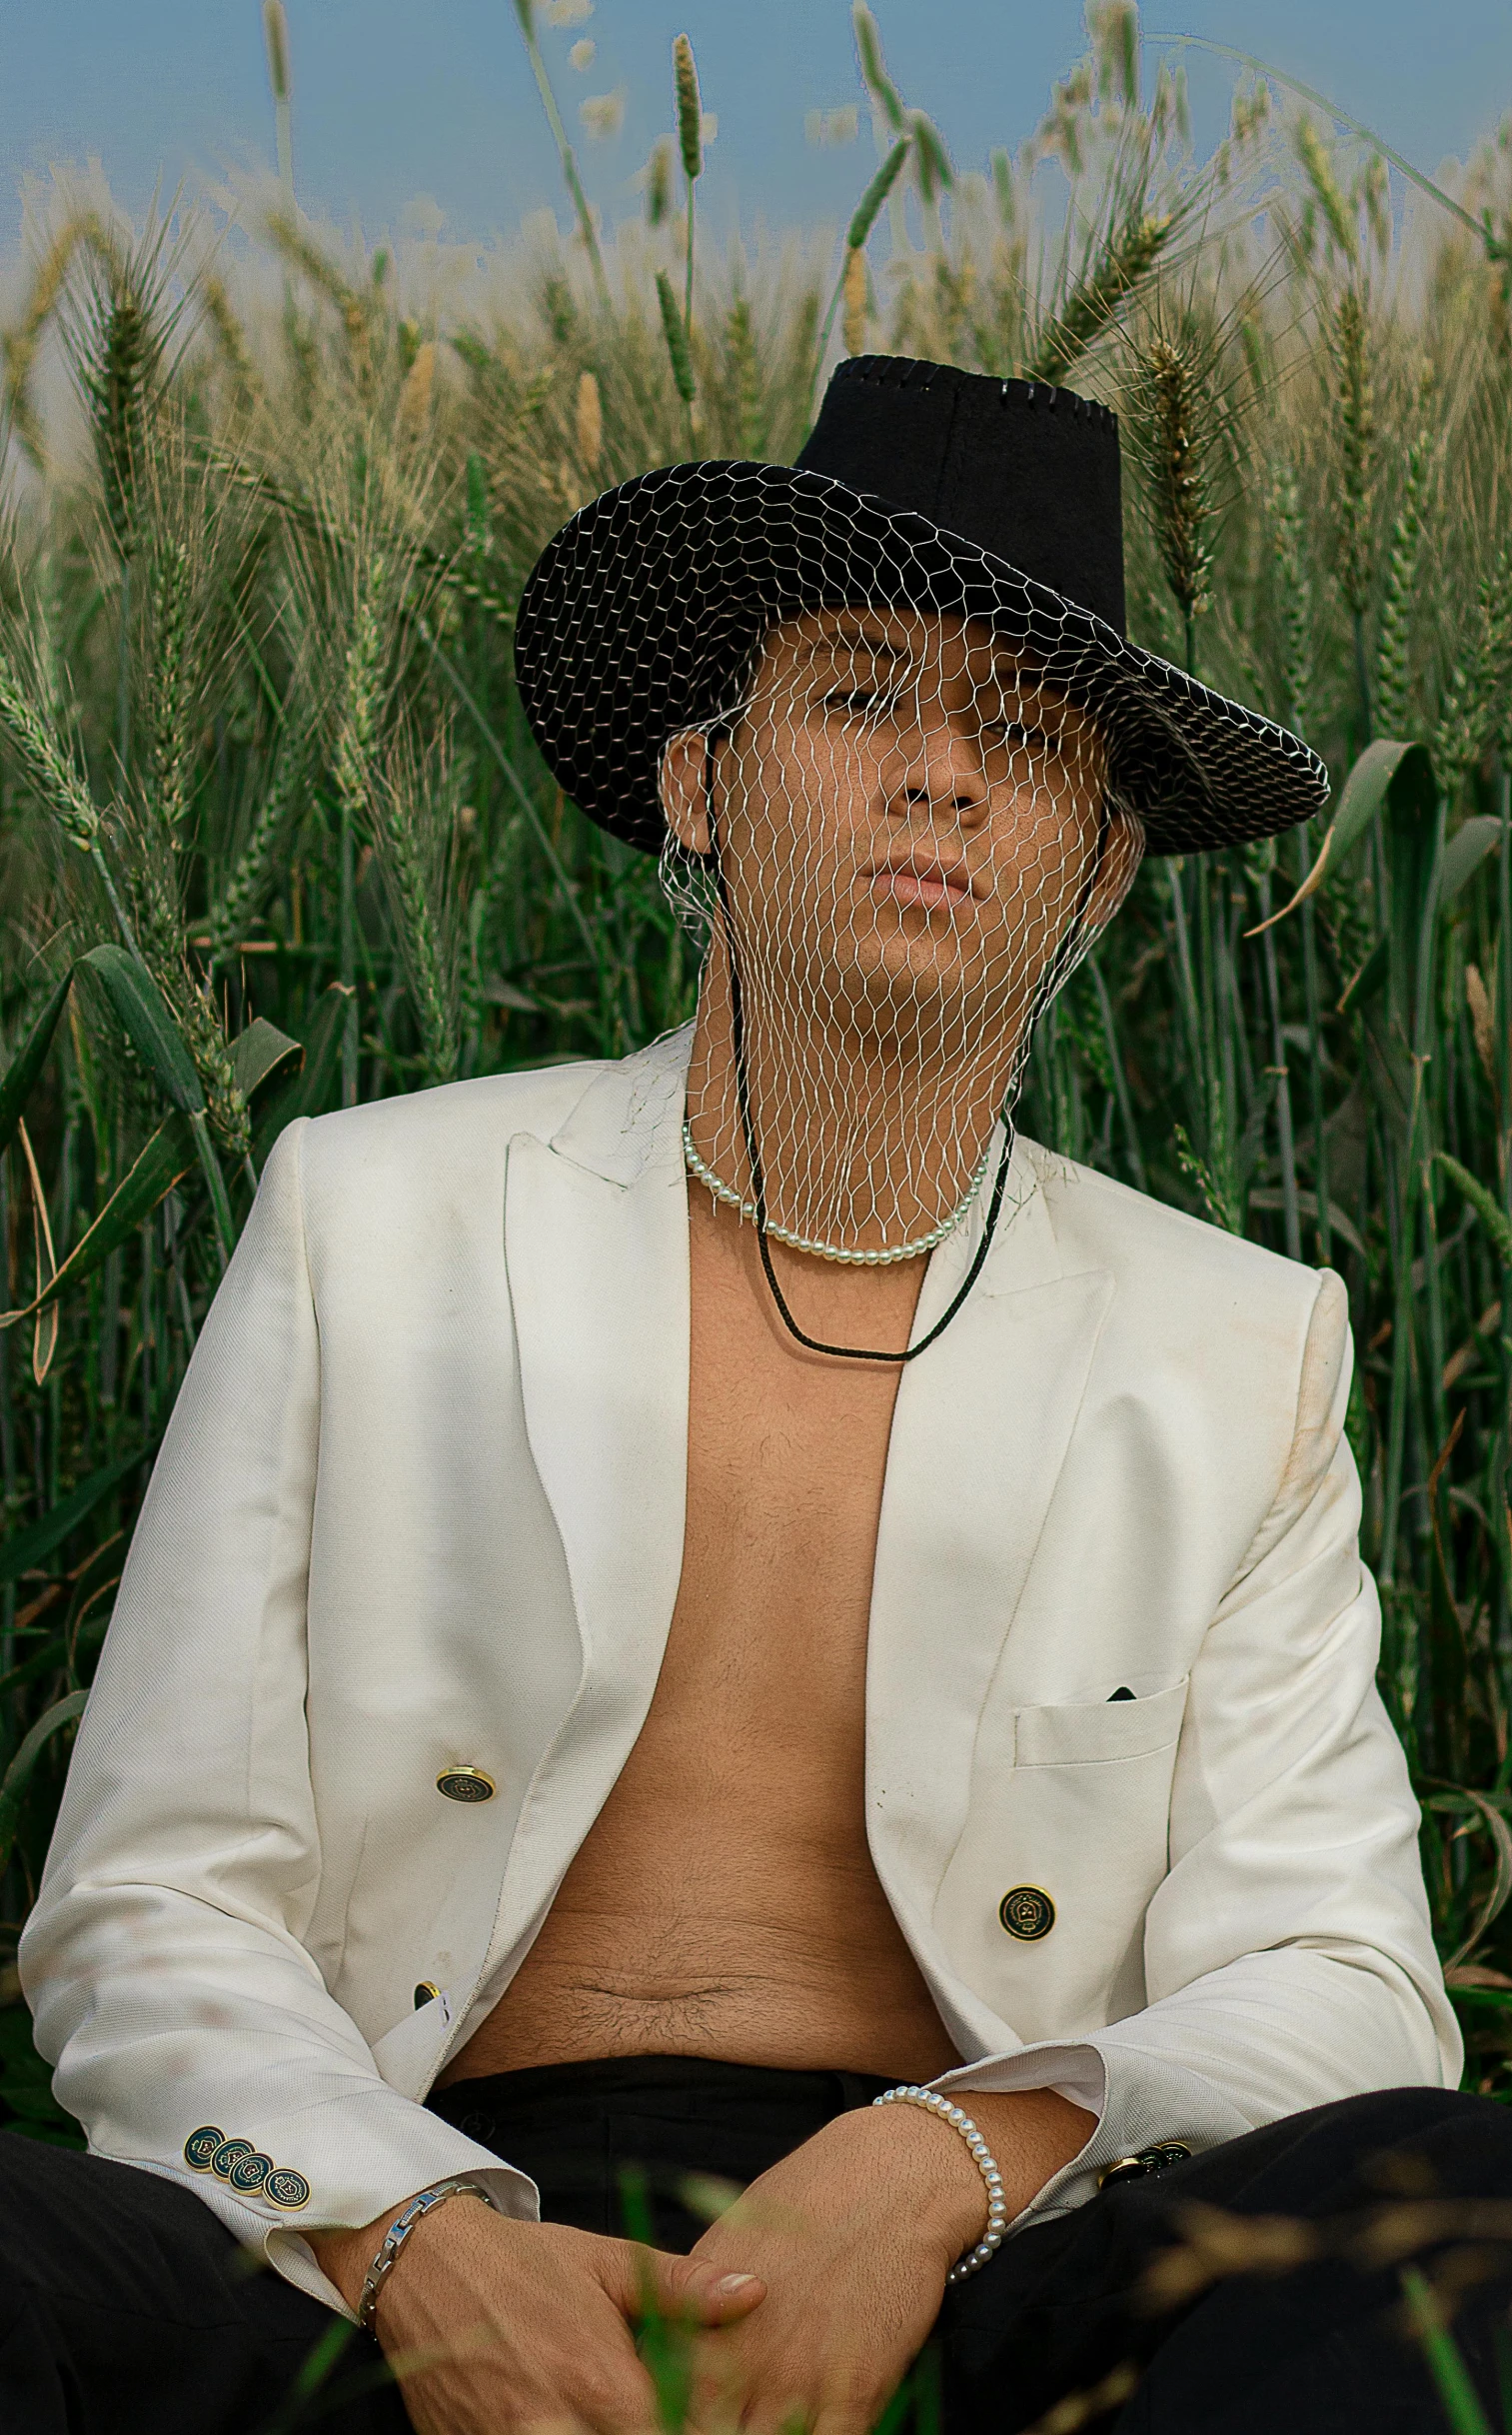 a shirtless man sitting in tall grass wearing a hat